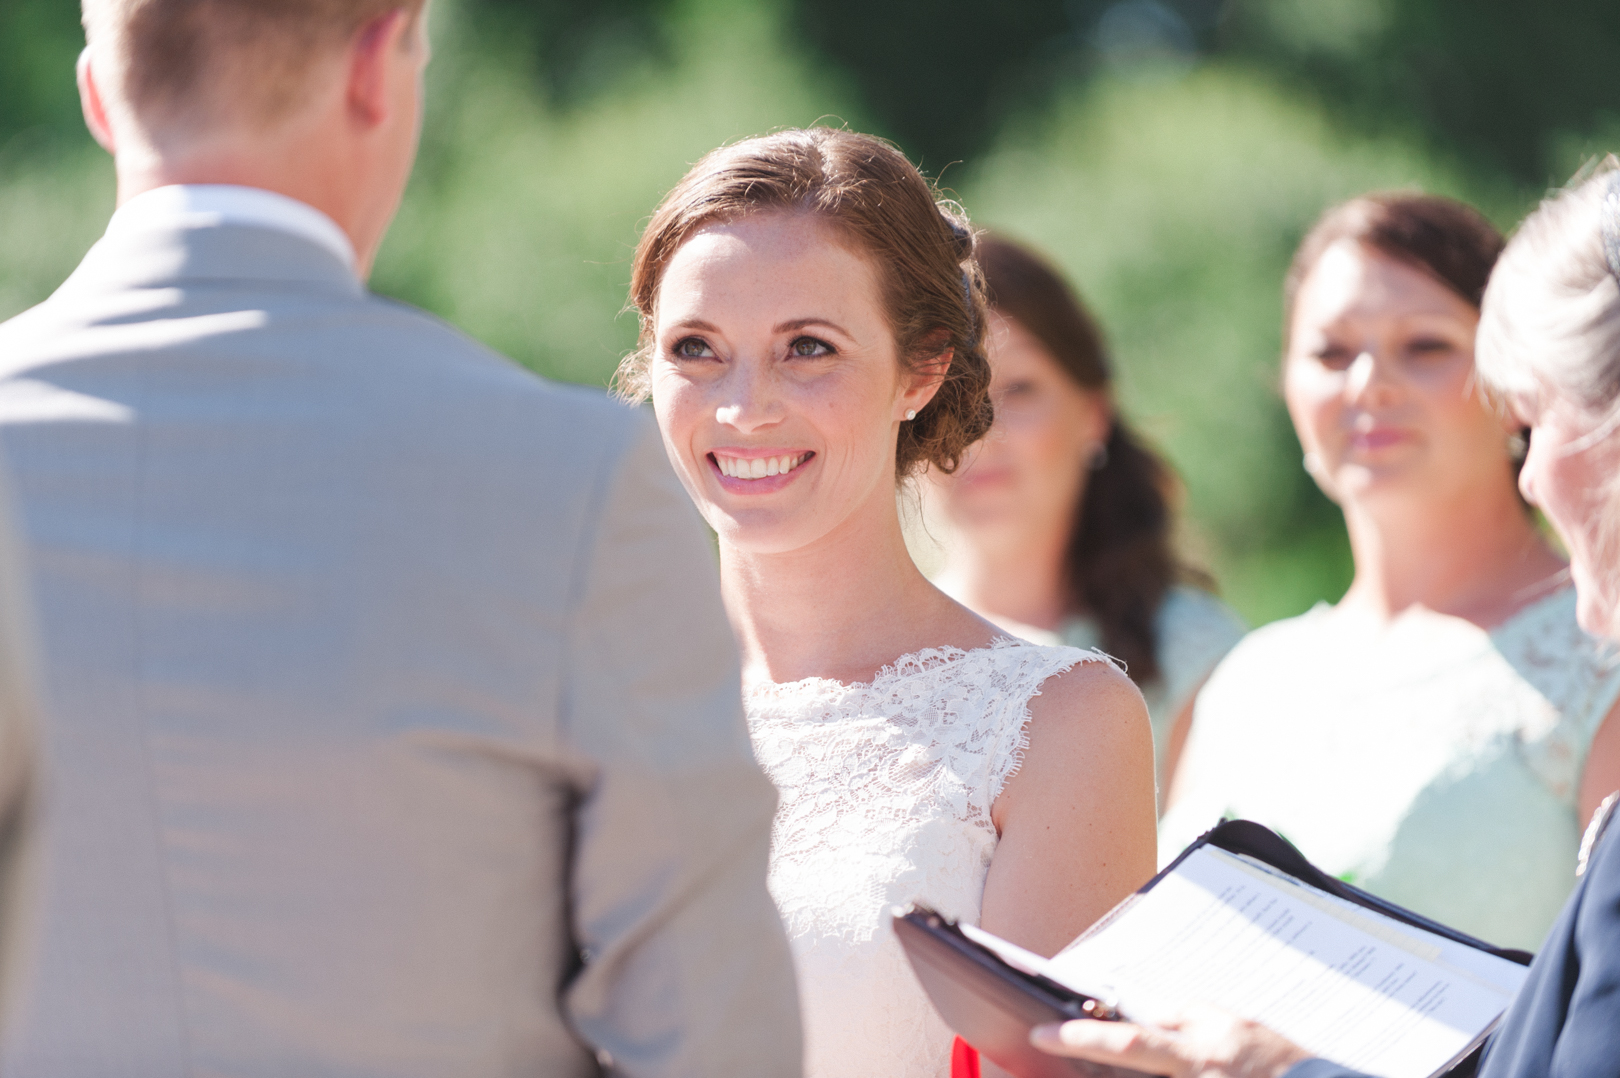 Bride smiling at her groom during ceremony